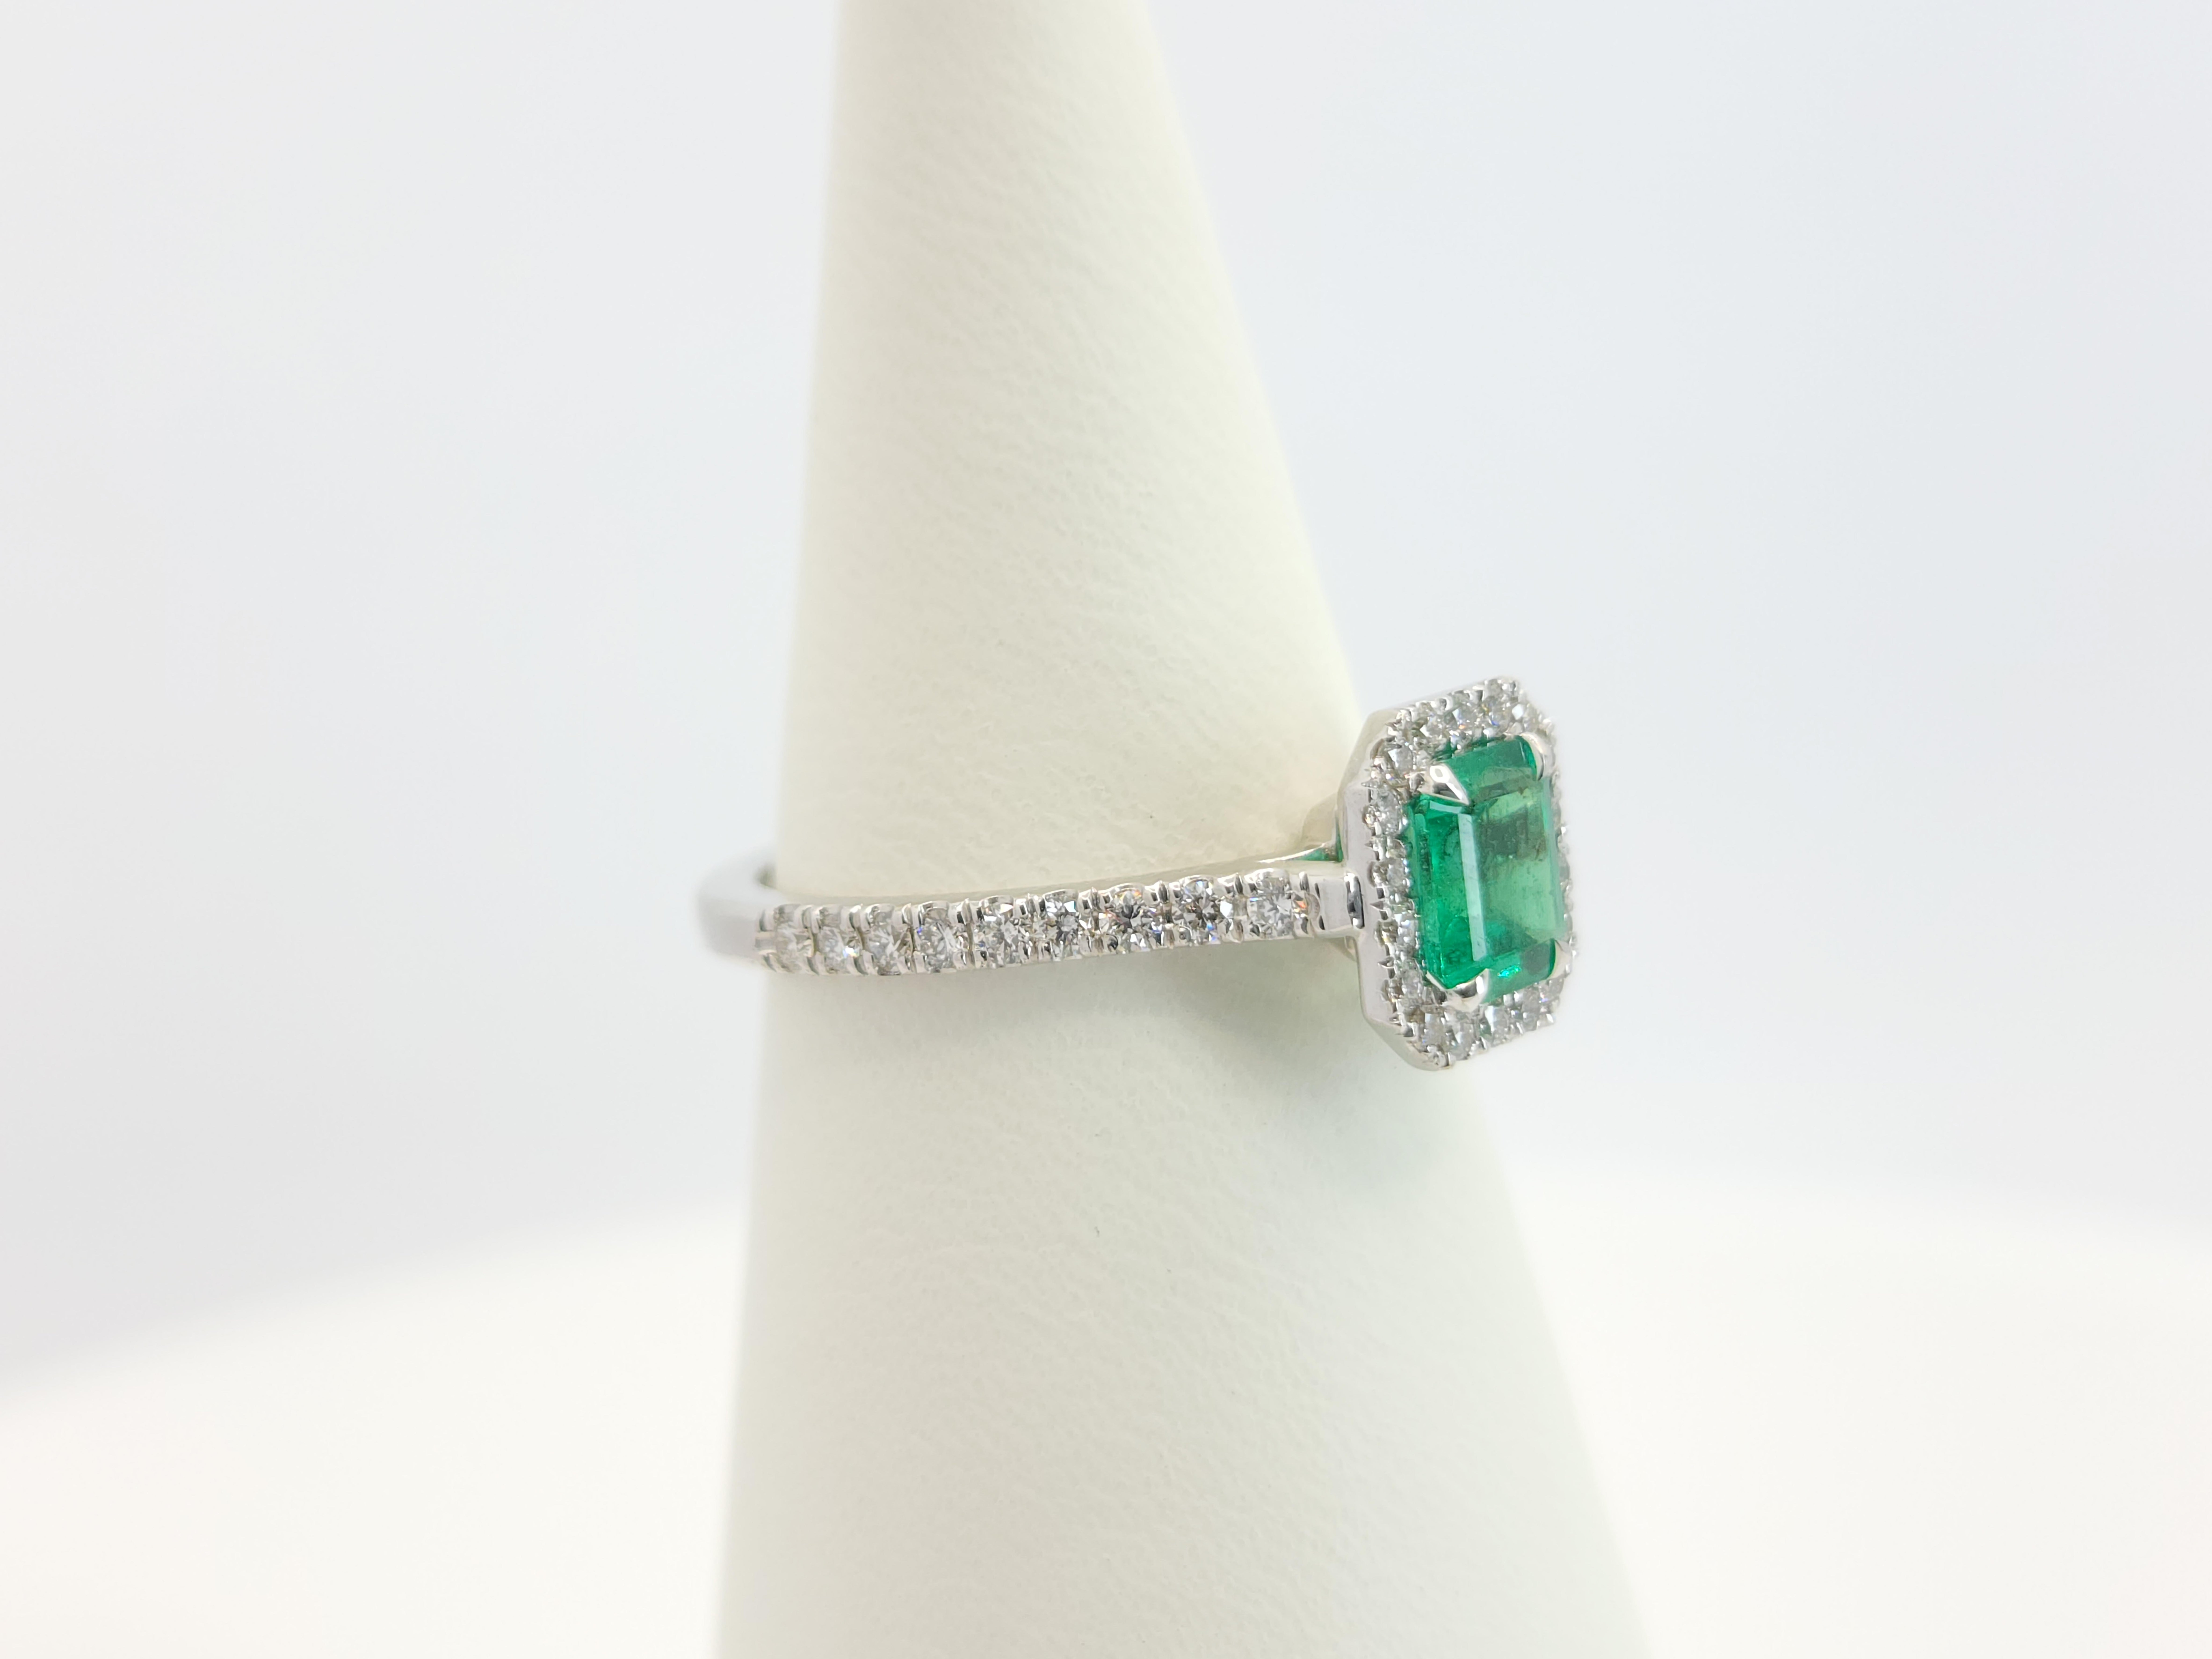 0.59CT Radiant Emerald and Diamonds Halo 14K Gold Engagement Ring

Product Description:

Introducing our Emerald Halo Ring, an exquisite engagement ring that symbolizes a love as deep and radiant as its design. Centered with a 0.59CT emerald and